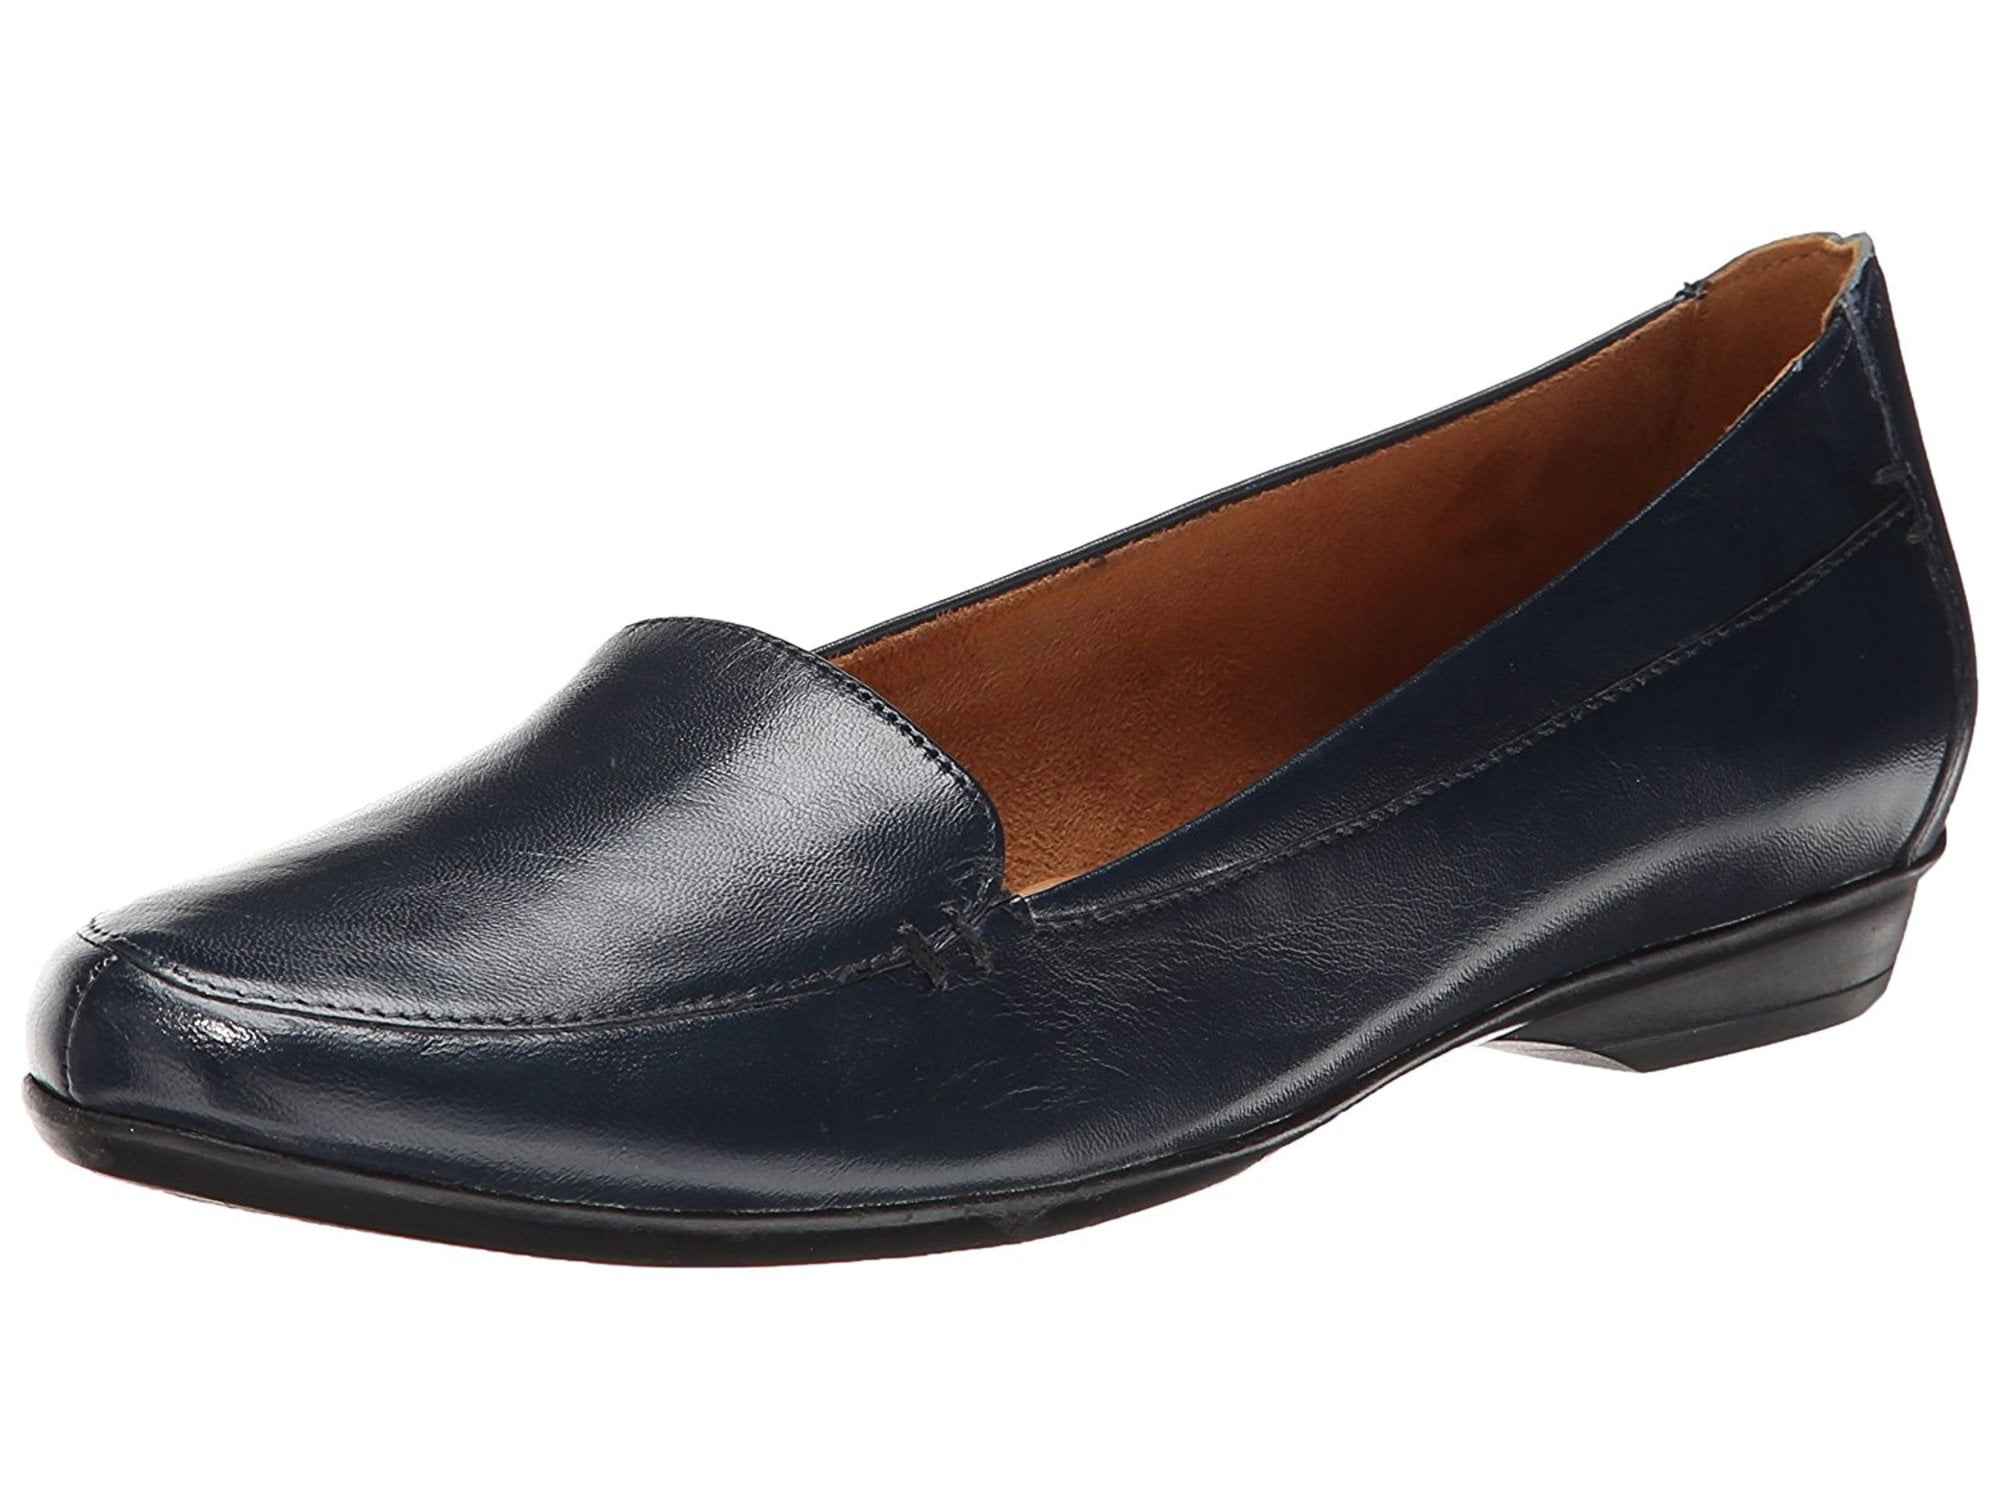 naturalizer women's loafers